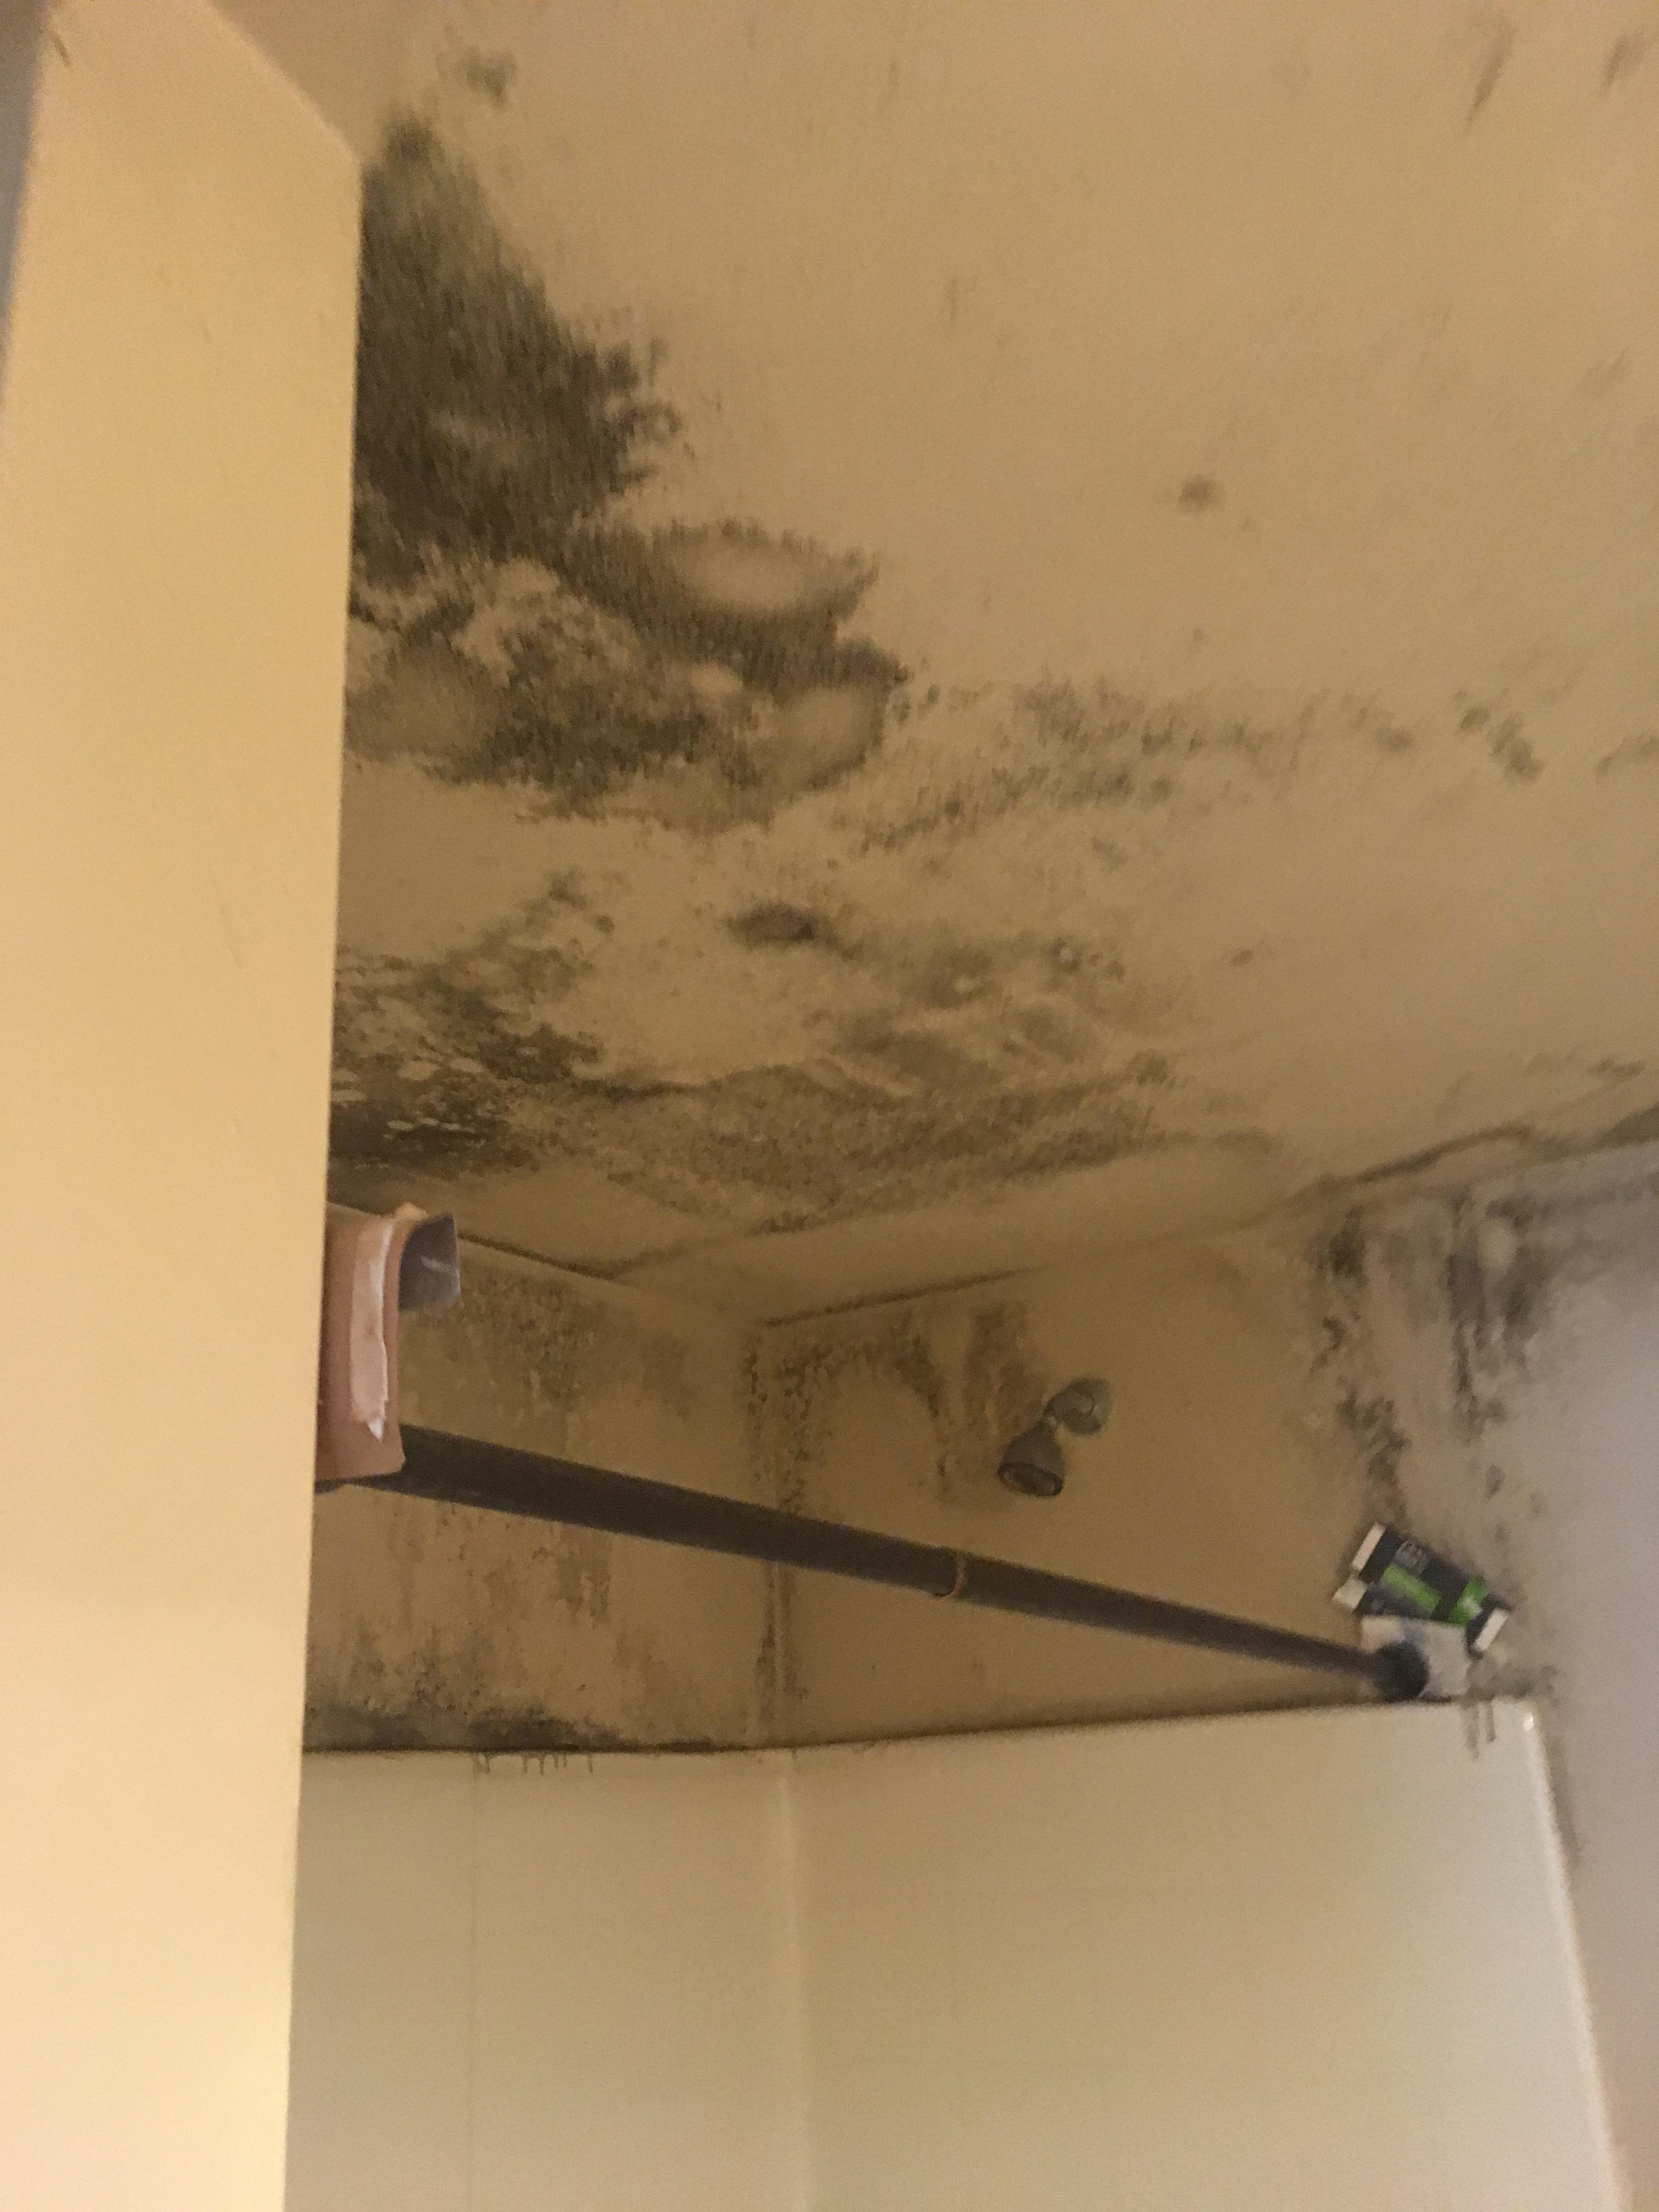 If your home or business has a water loss and you are starting to see spots on the ceiling and walls use the highly skilled technicians at SERVPRO to check for possible microbial growth.